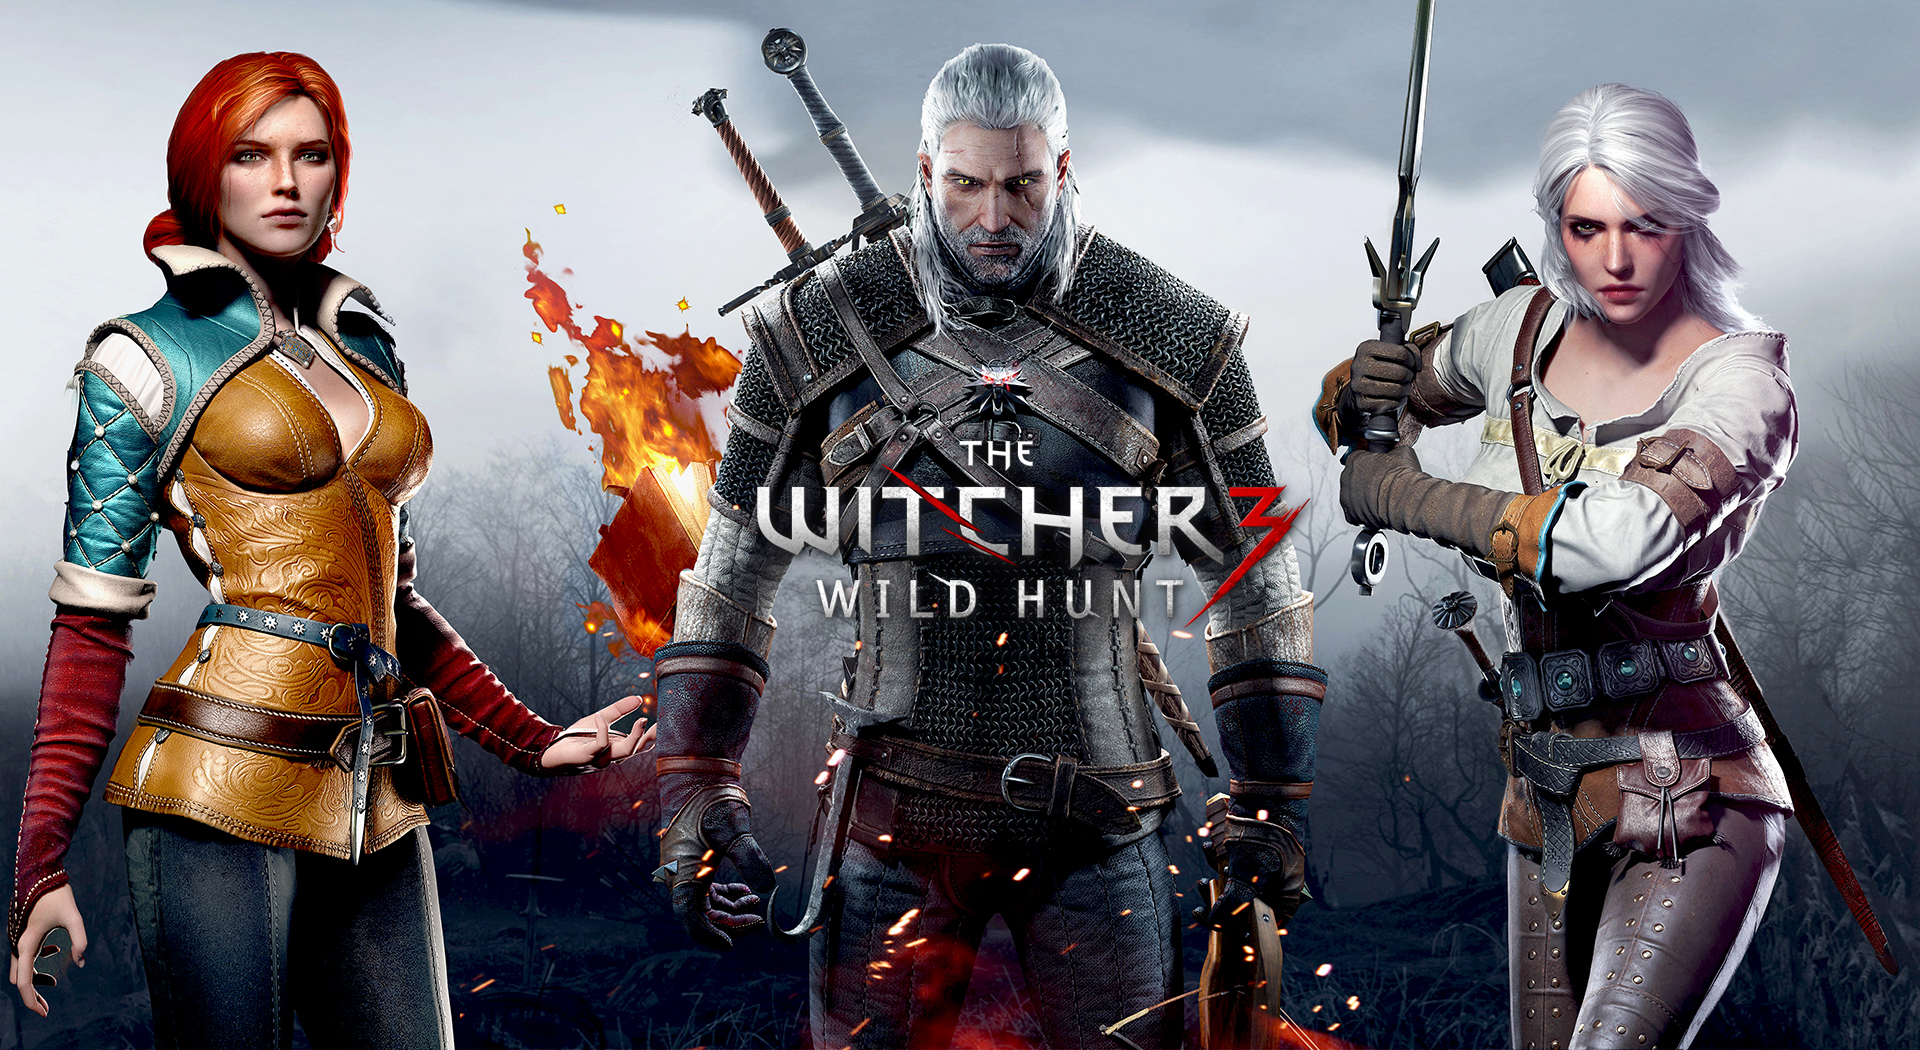  the Collection The Witcher Video Game The Witcher Wild Hunt